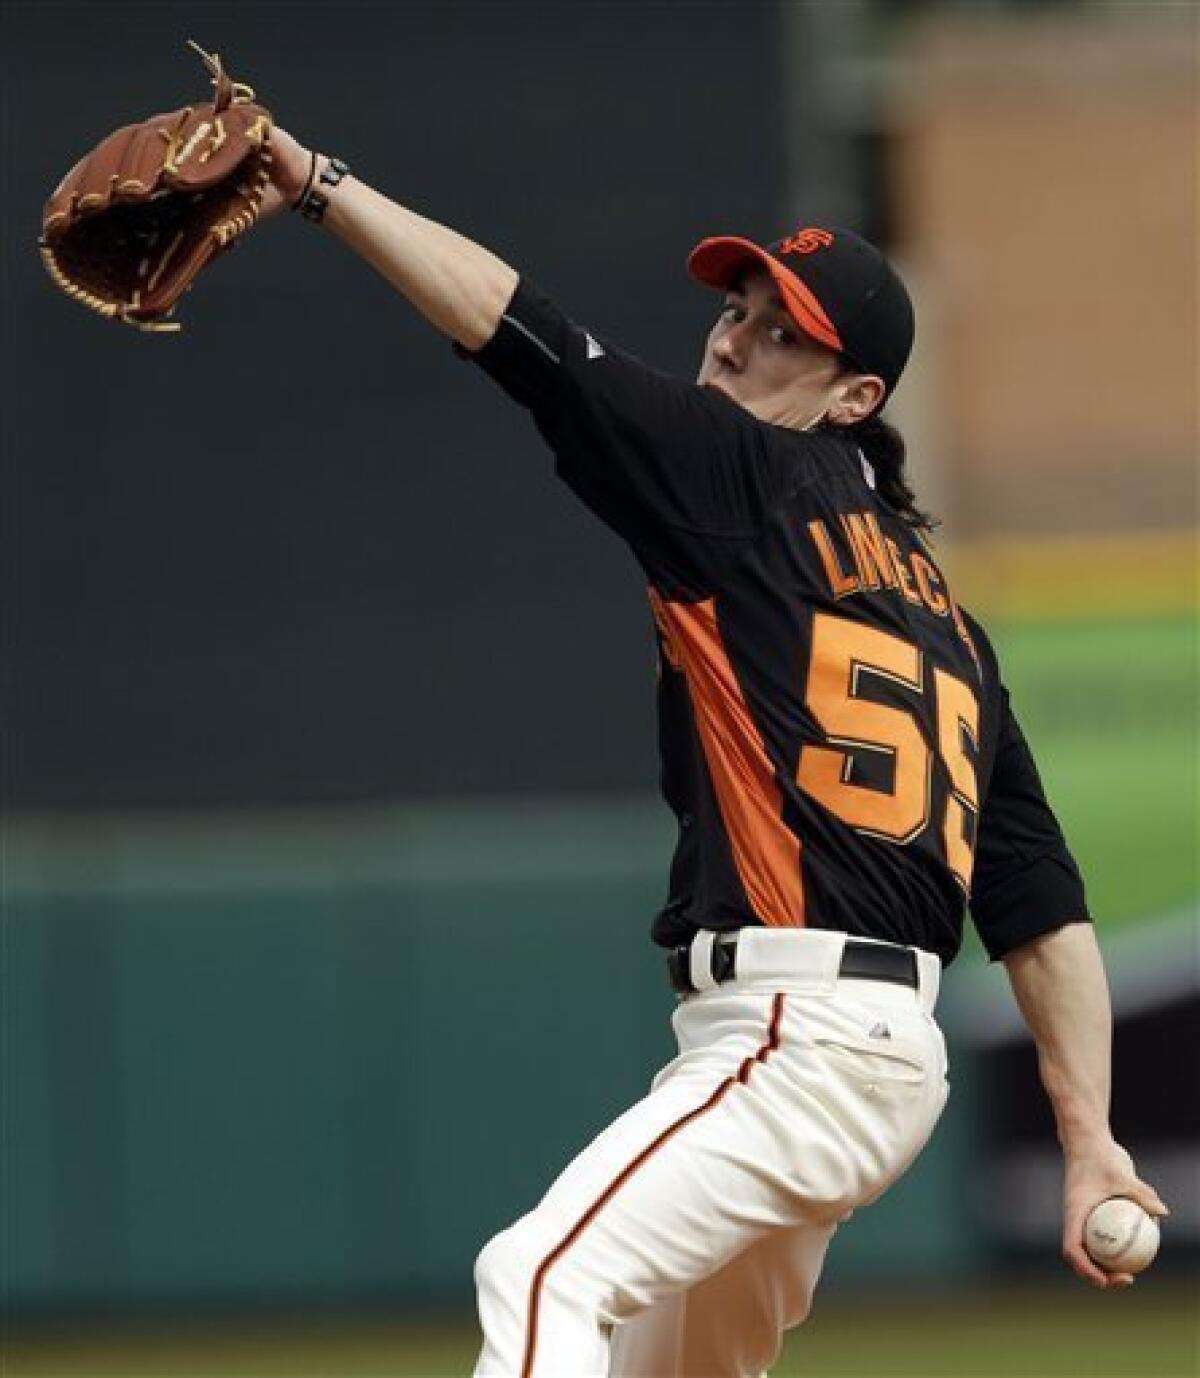 Lincecum wants one more minor league start